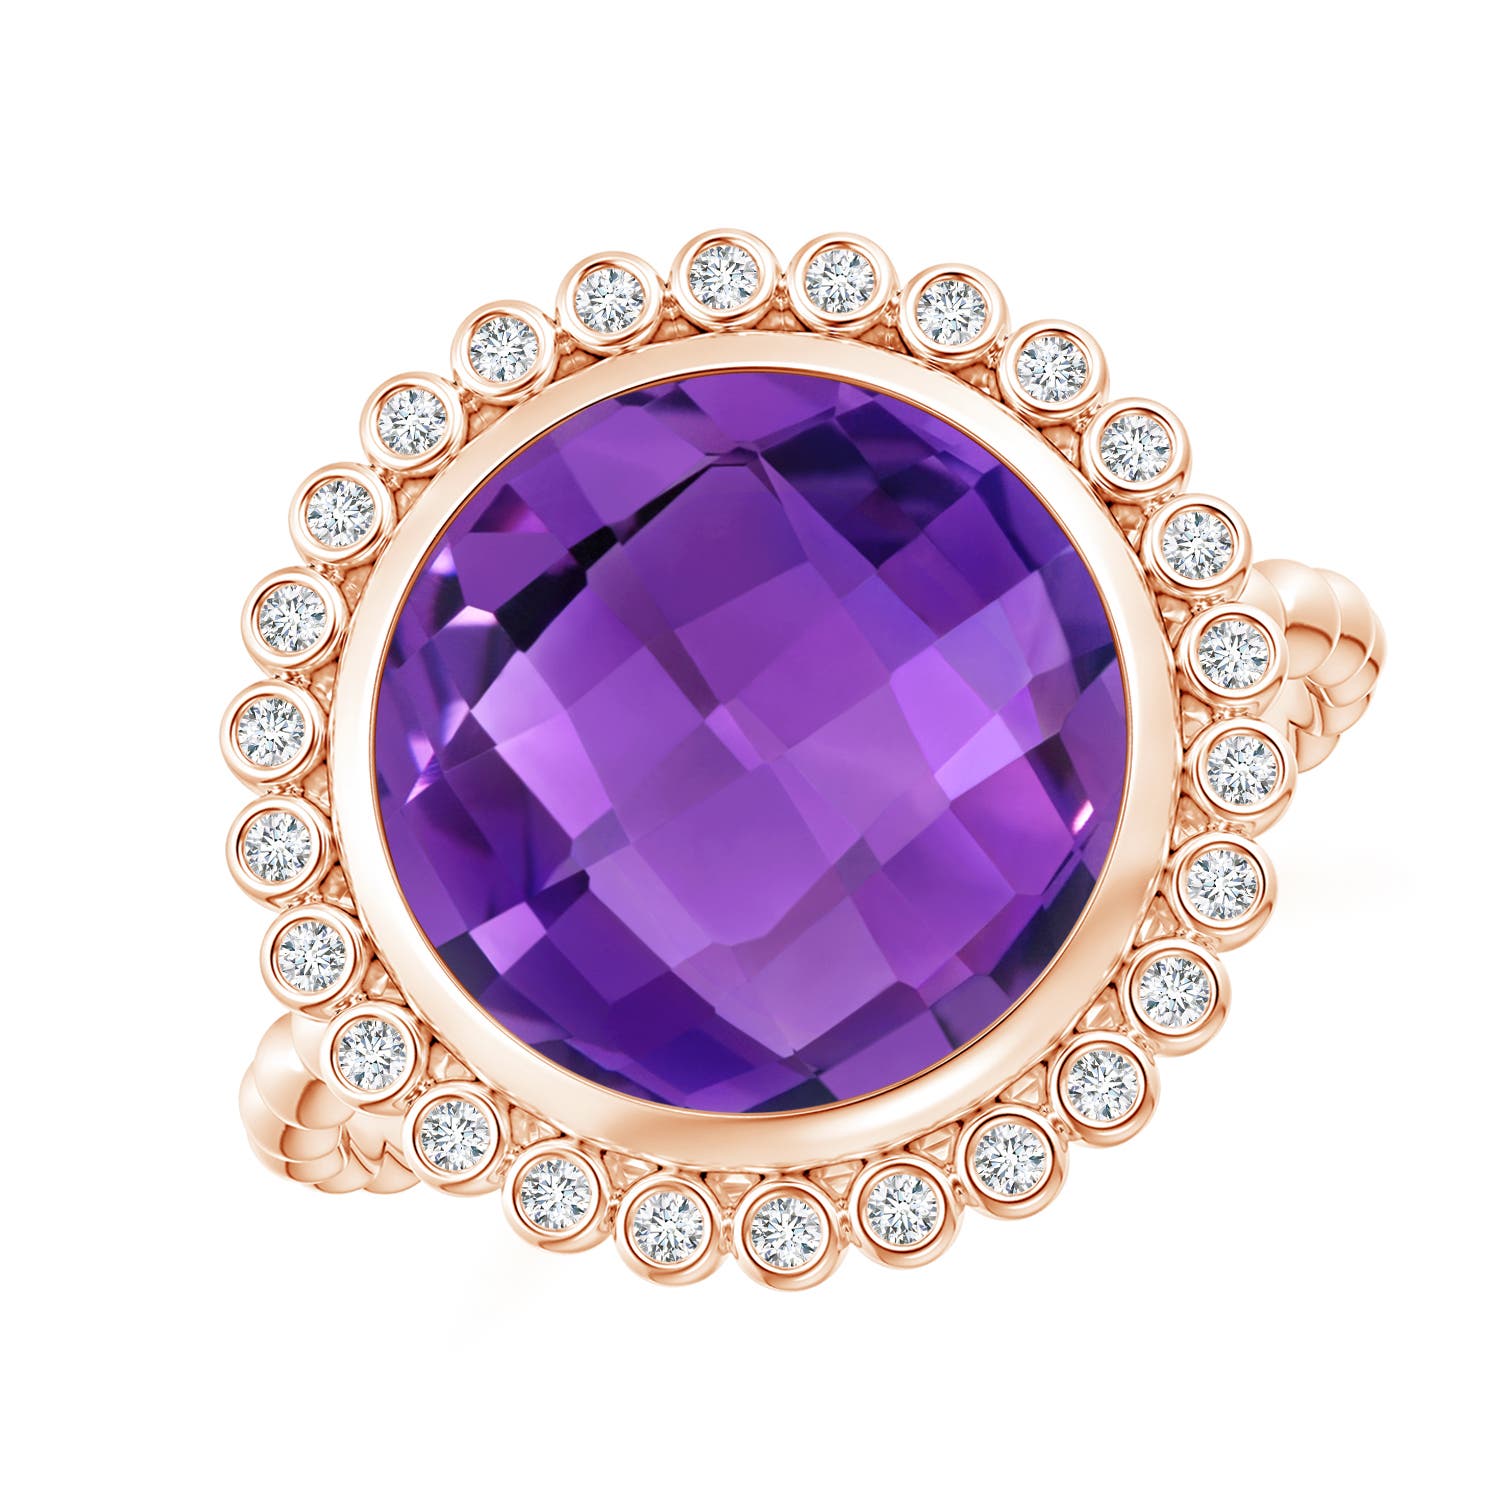 AAA - Amethyst / 5.01 CT / 14 KT Rose Gold